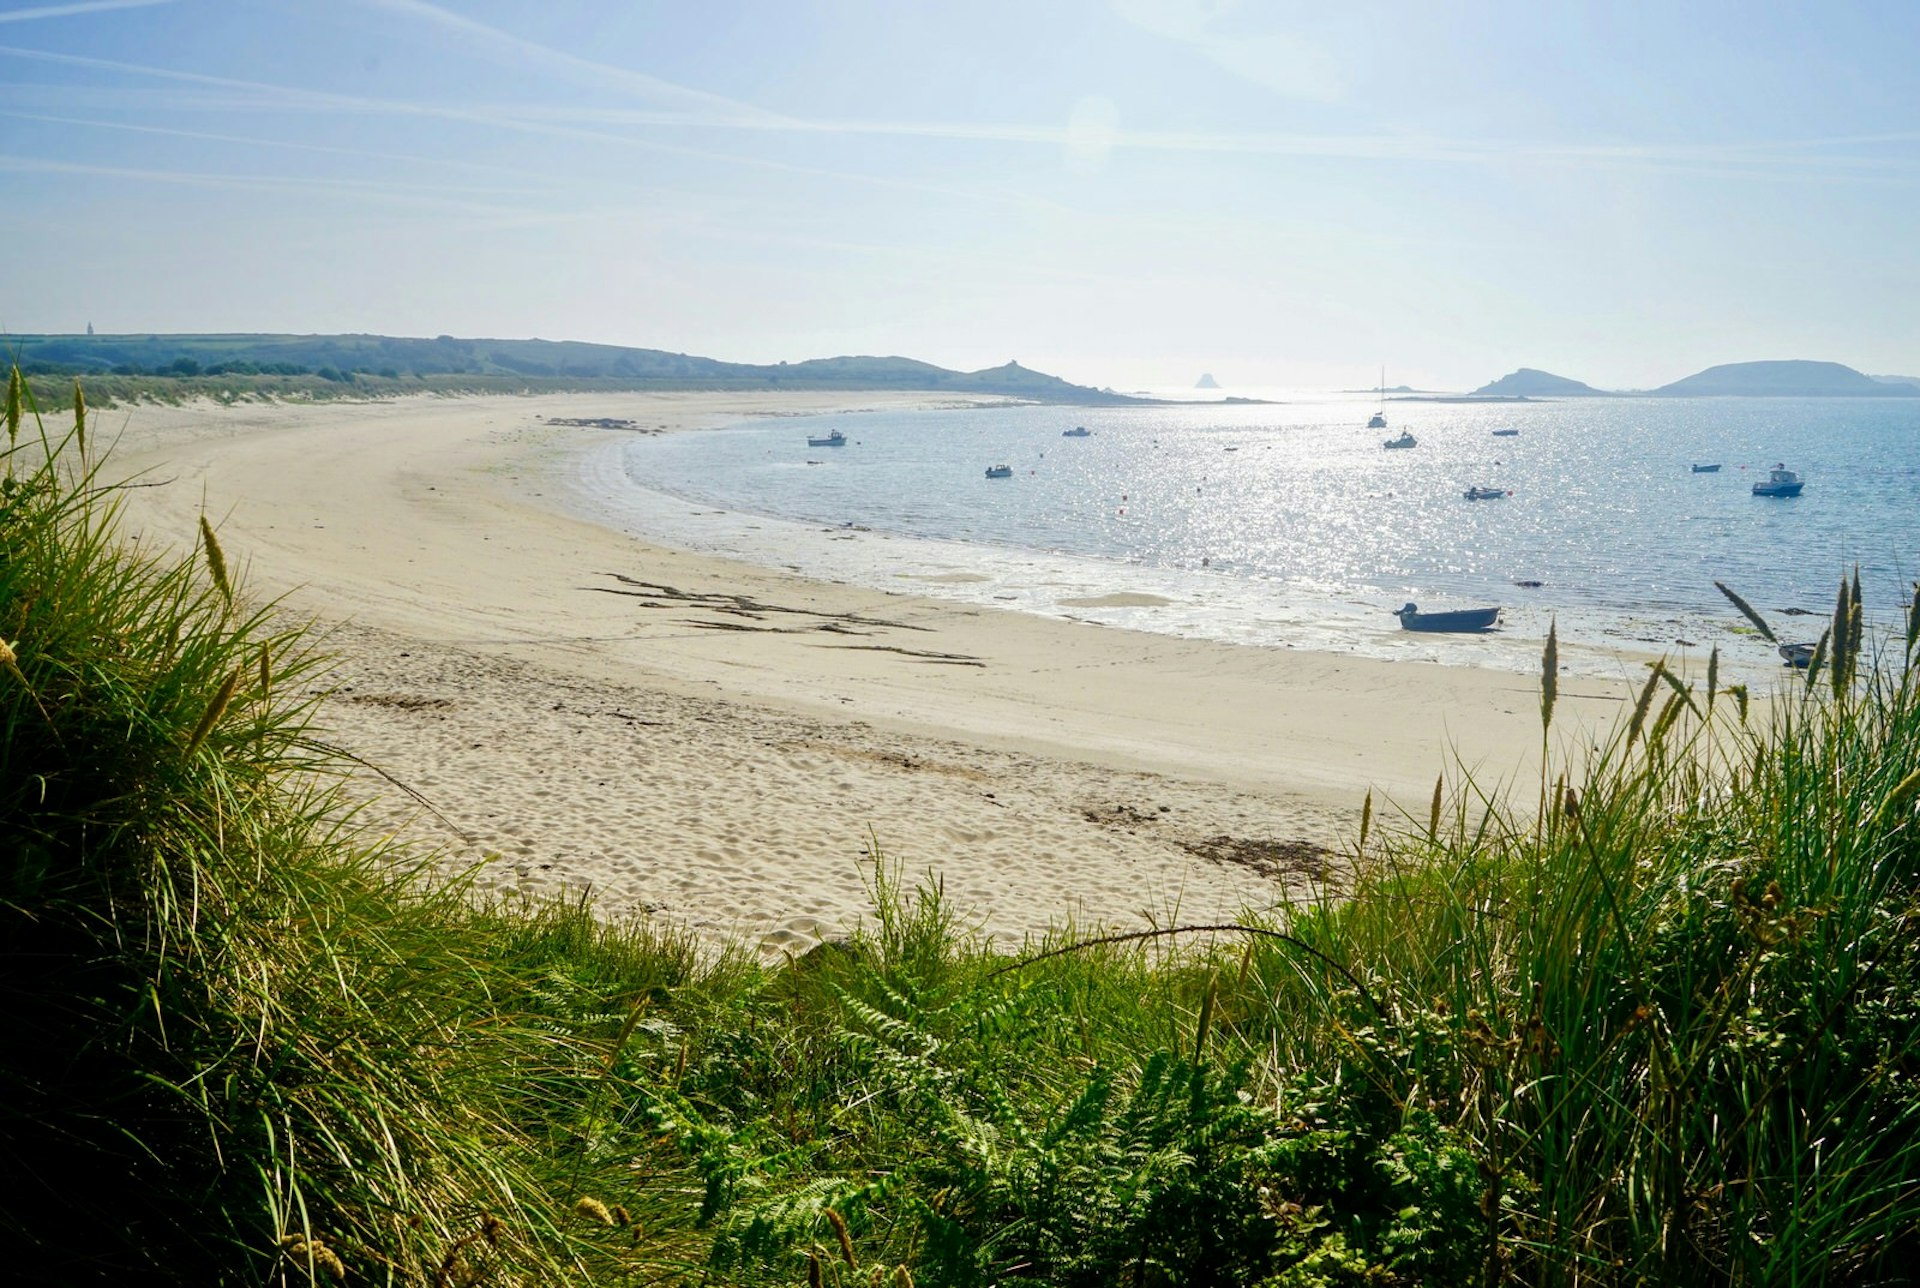 Par Beach, St Martin's, Isles of Scilly, England, UK © James Kay / Lonely Planet